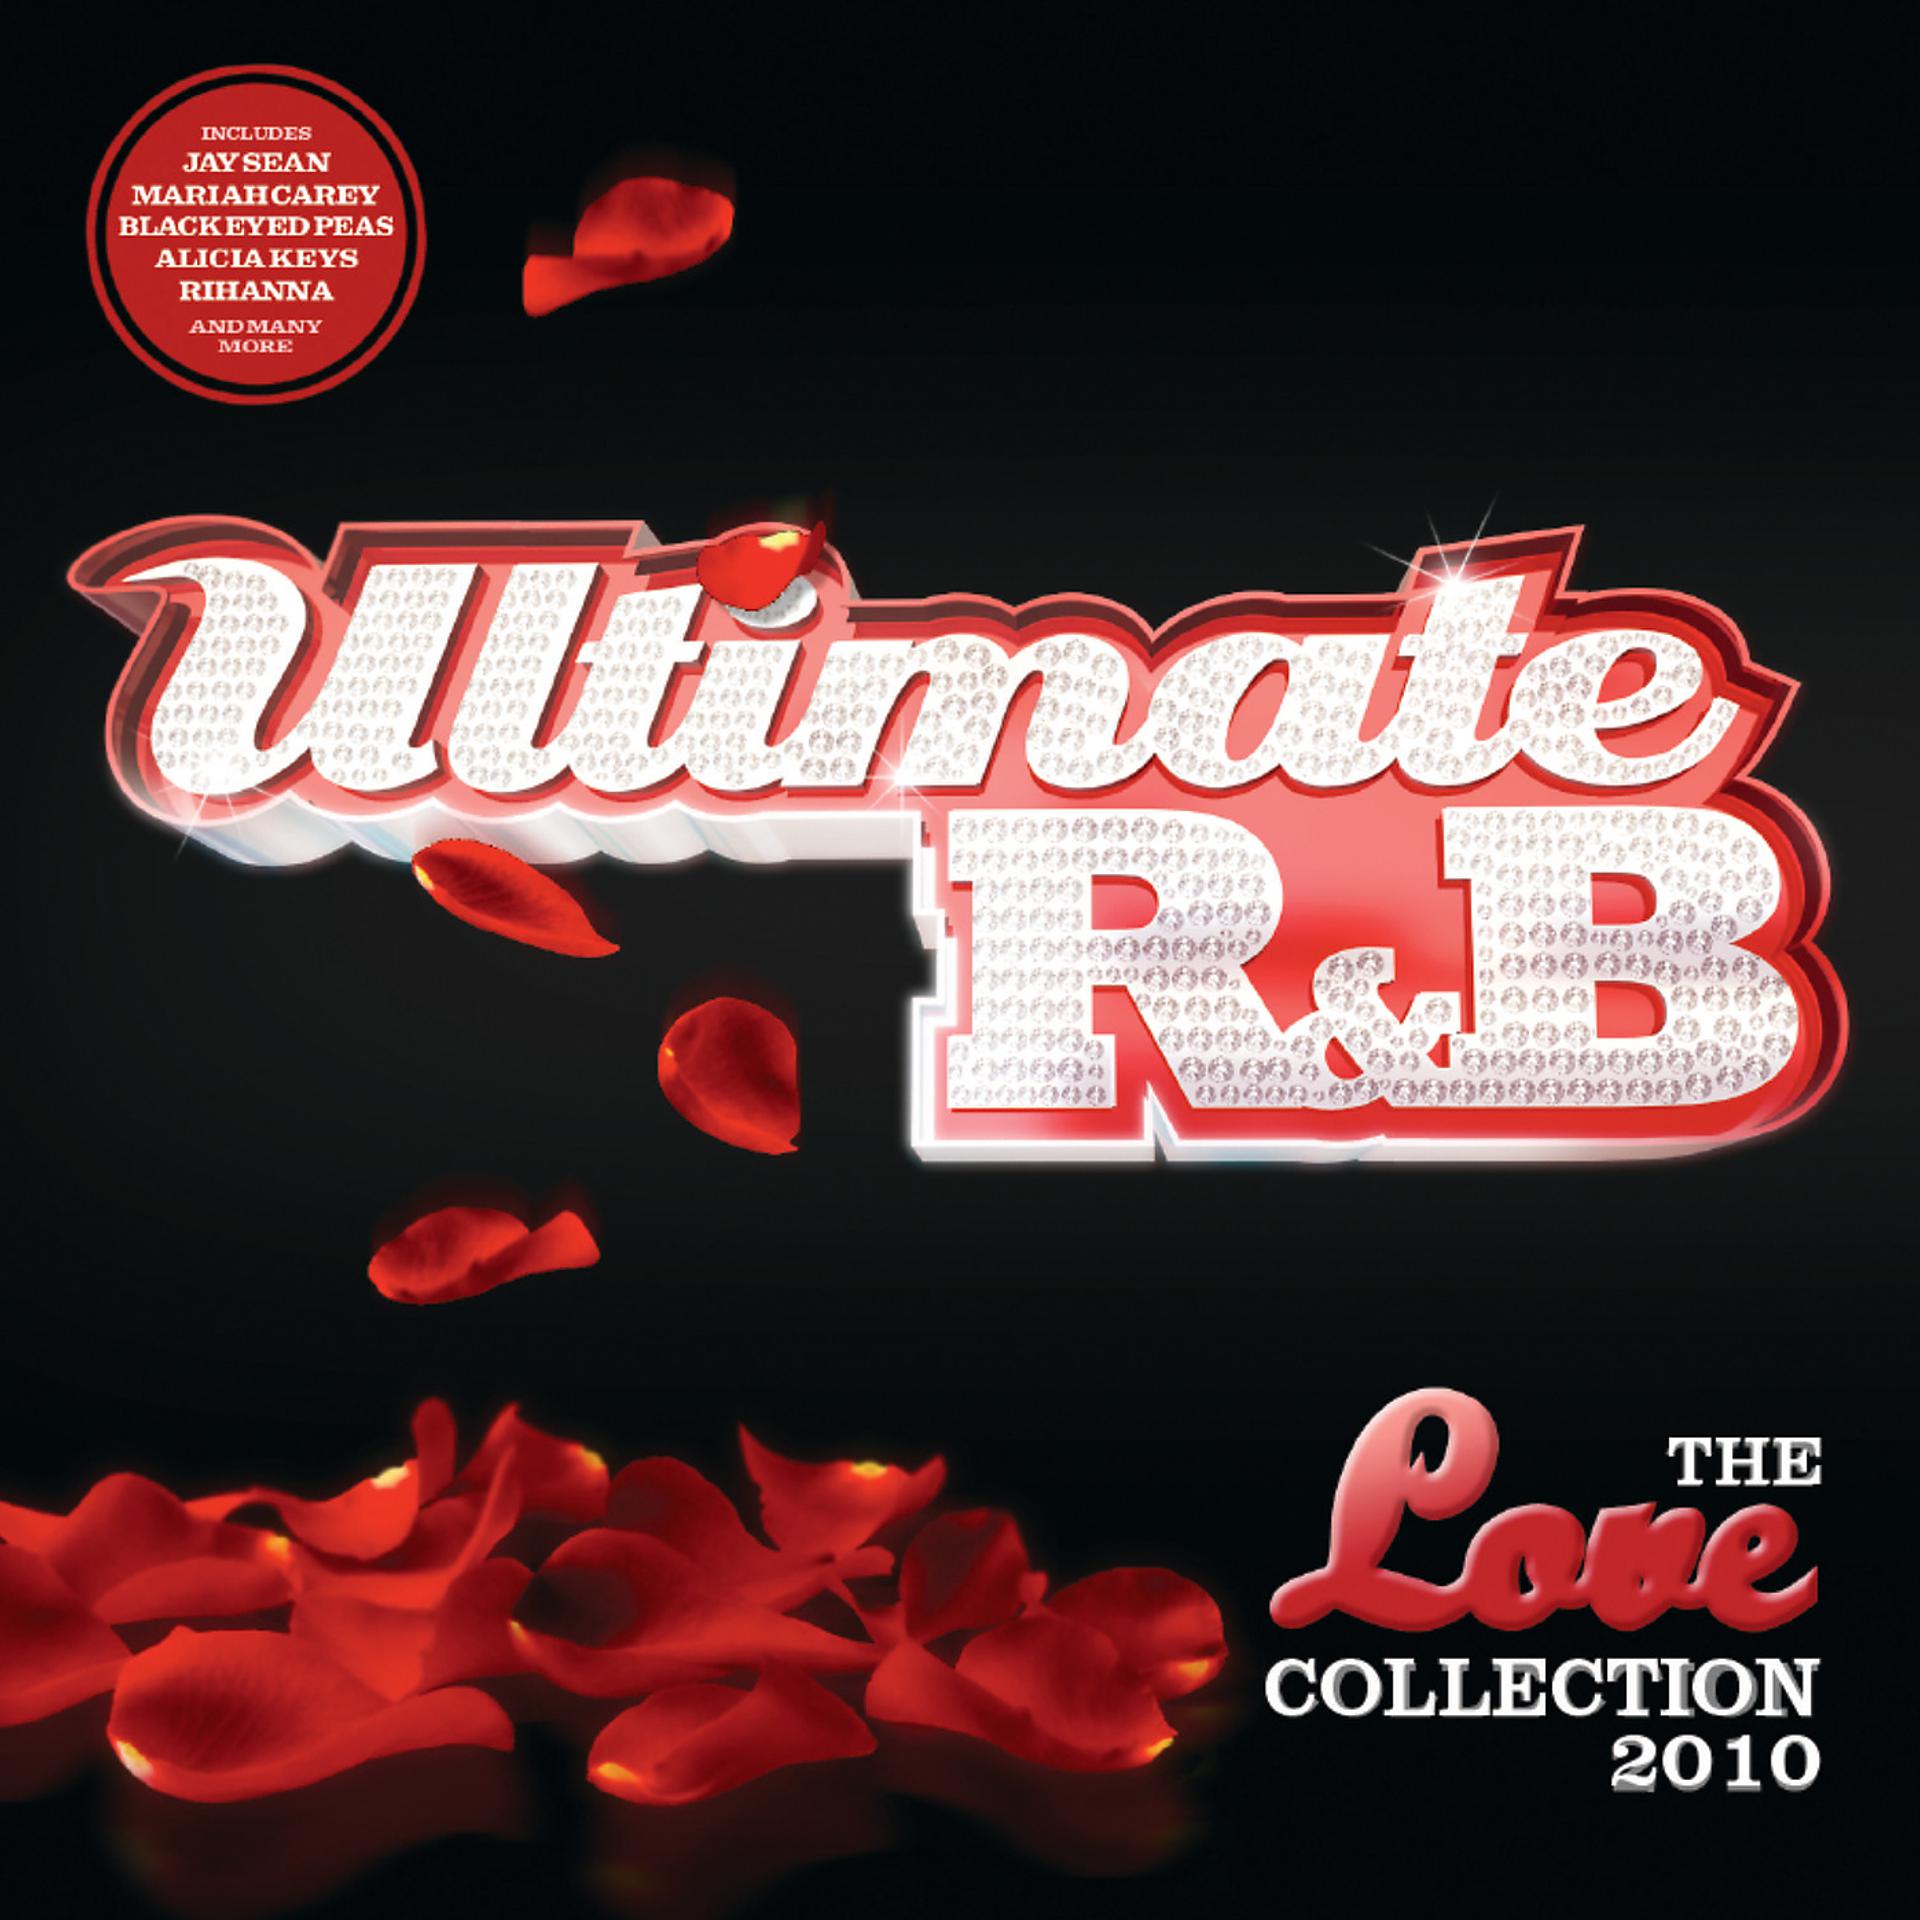 R&B Ultimate. Ultimate r&b the Love collection 2010. Диск Love collection. R&B обложки.